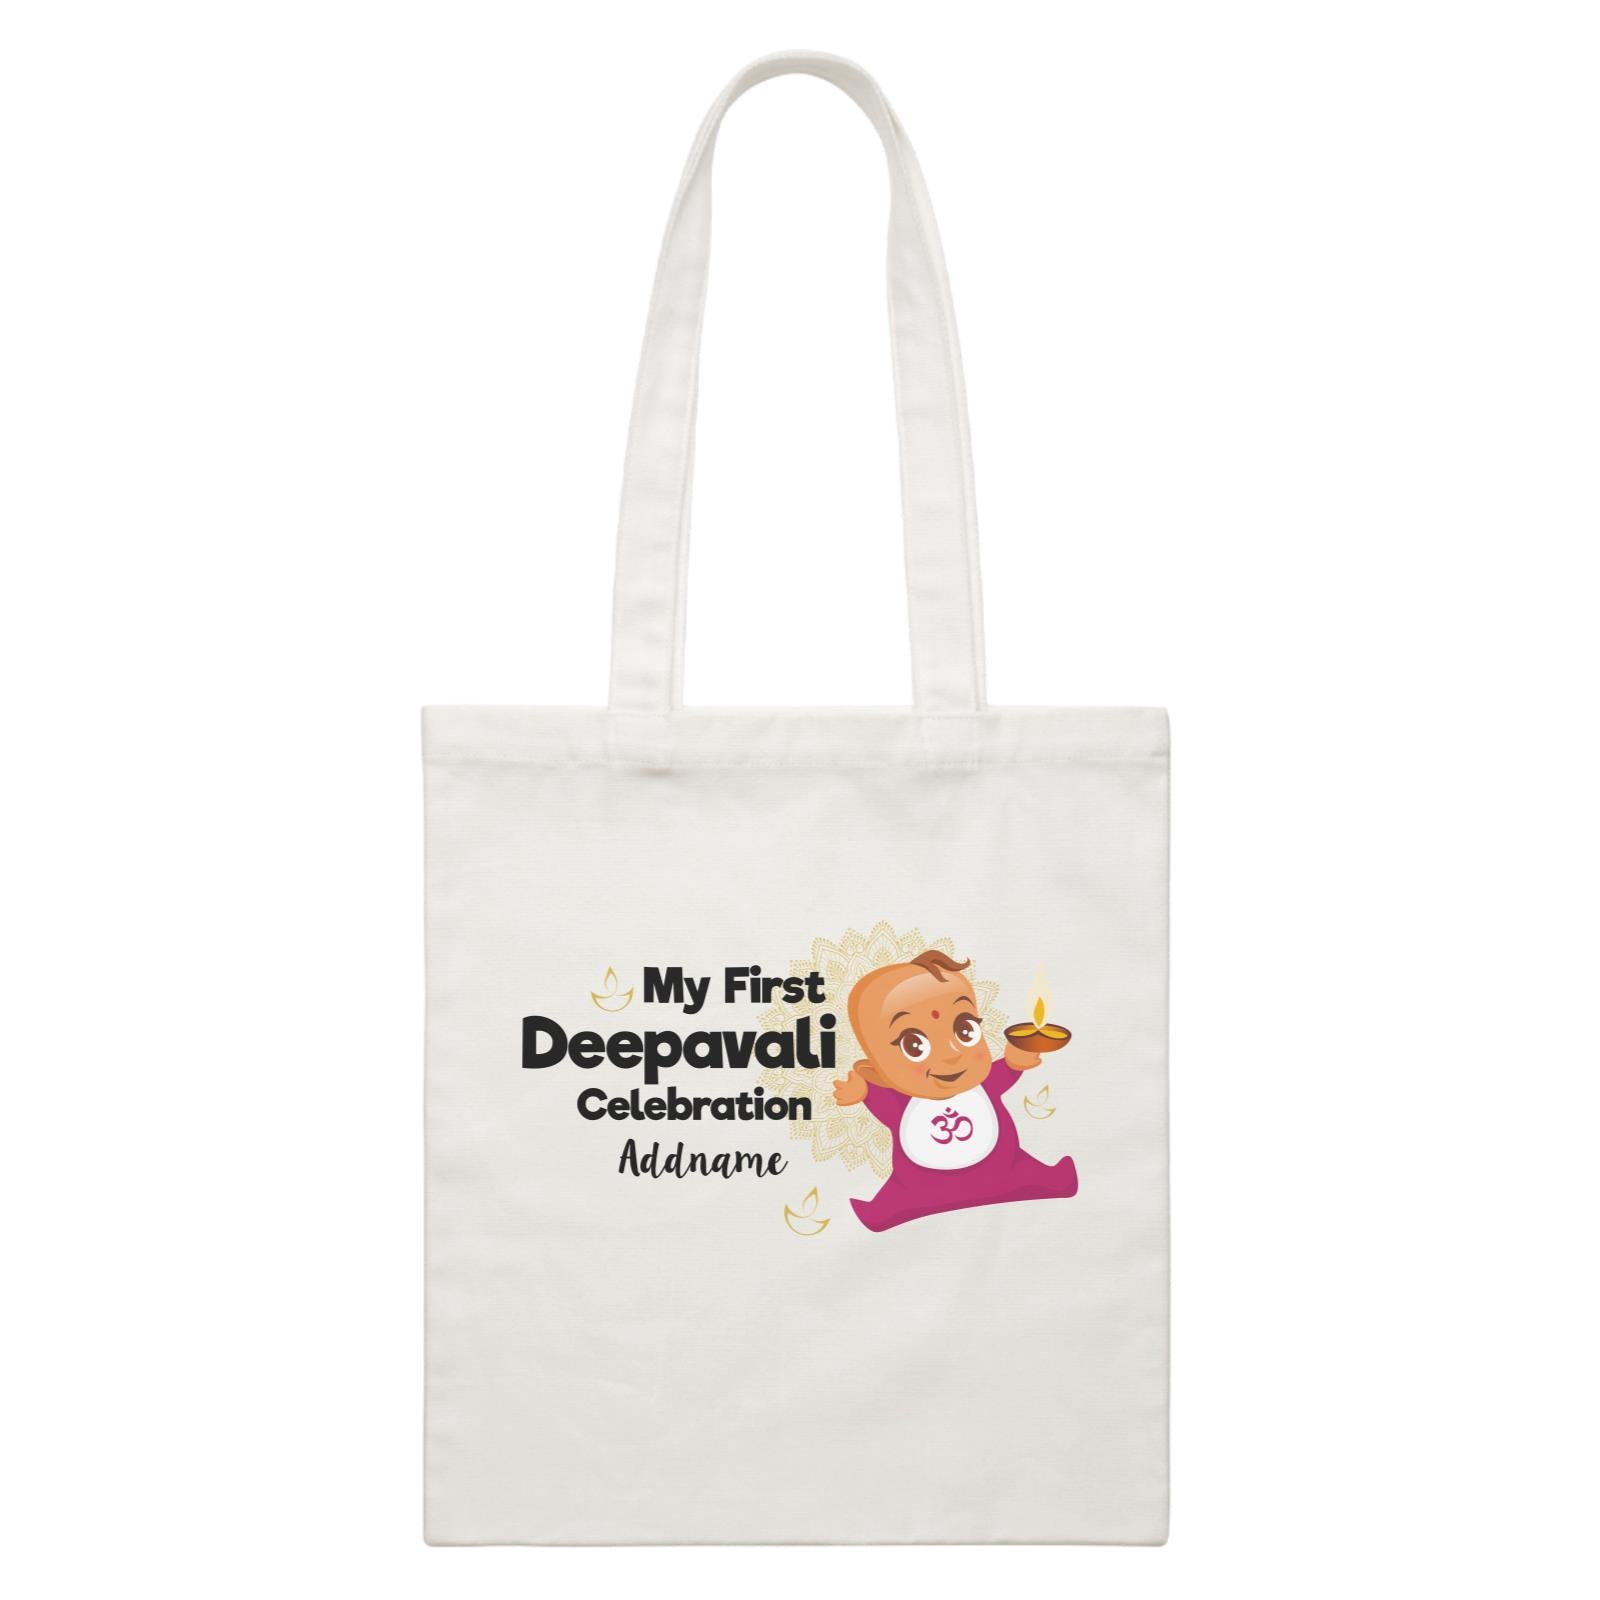 Cute Baby My First Deepavali Celebration Addname White Canvas Bag